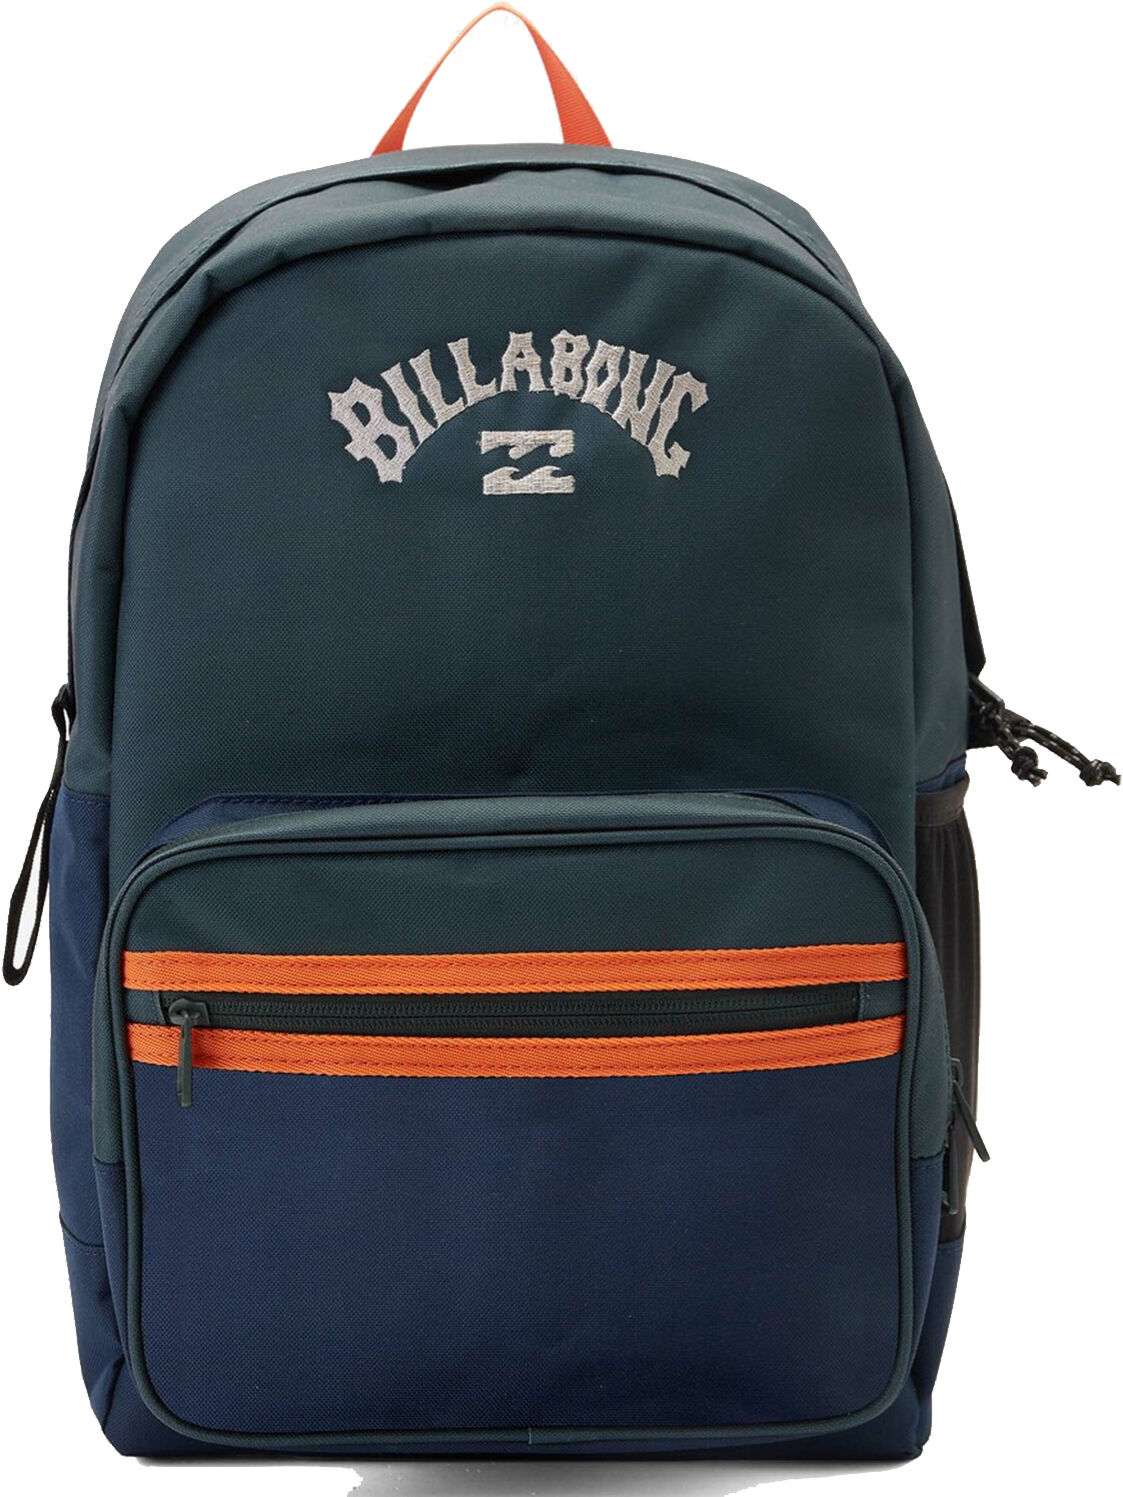 Billabong ALL DAY PLUS 22L DARK FOREST One Size